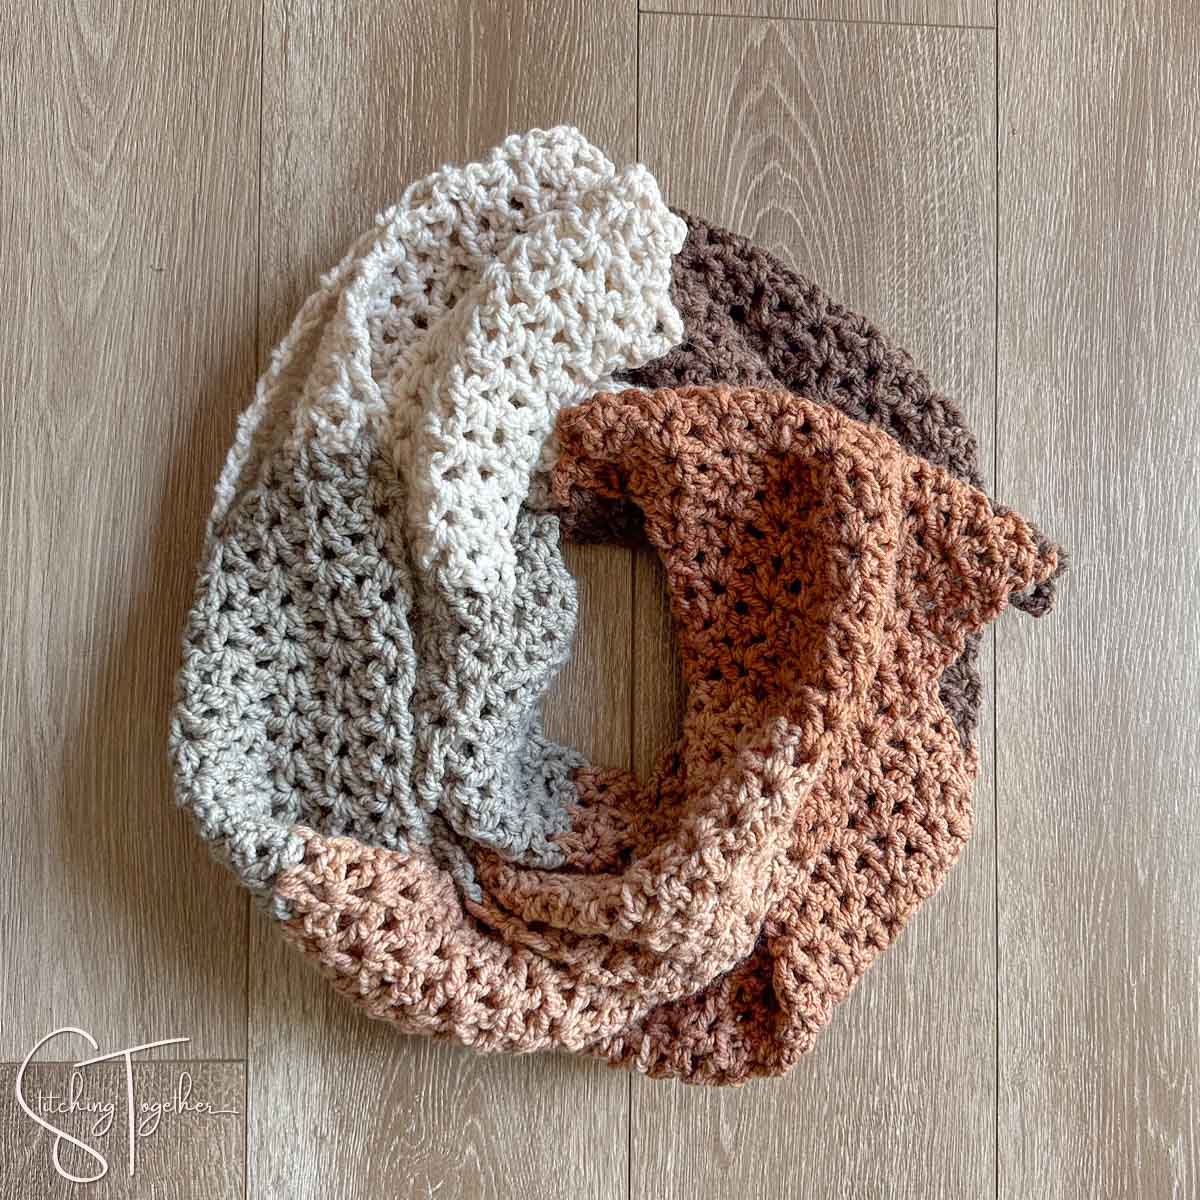 crochet v stitch scarf with multiple colors laid in a circle on the floor